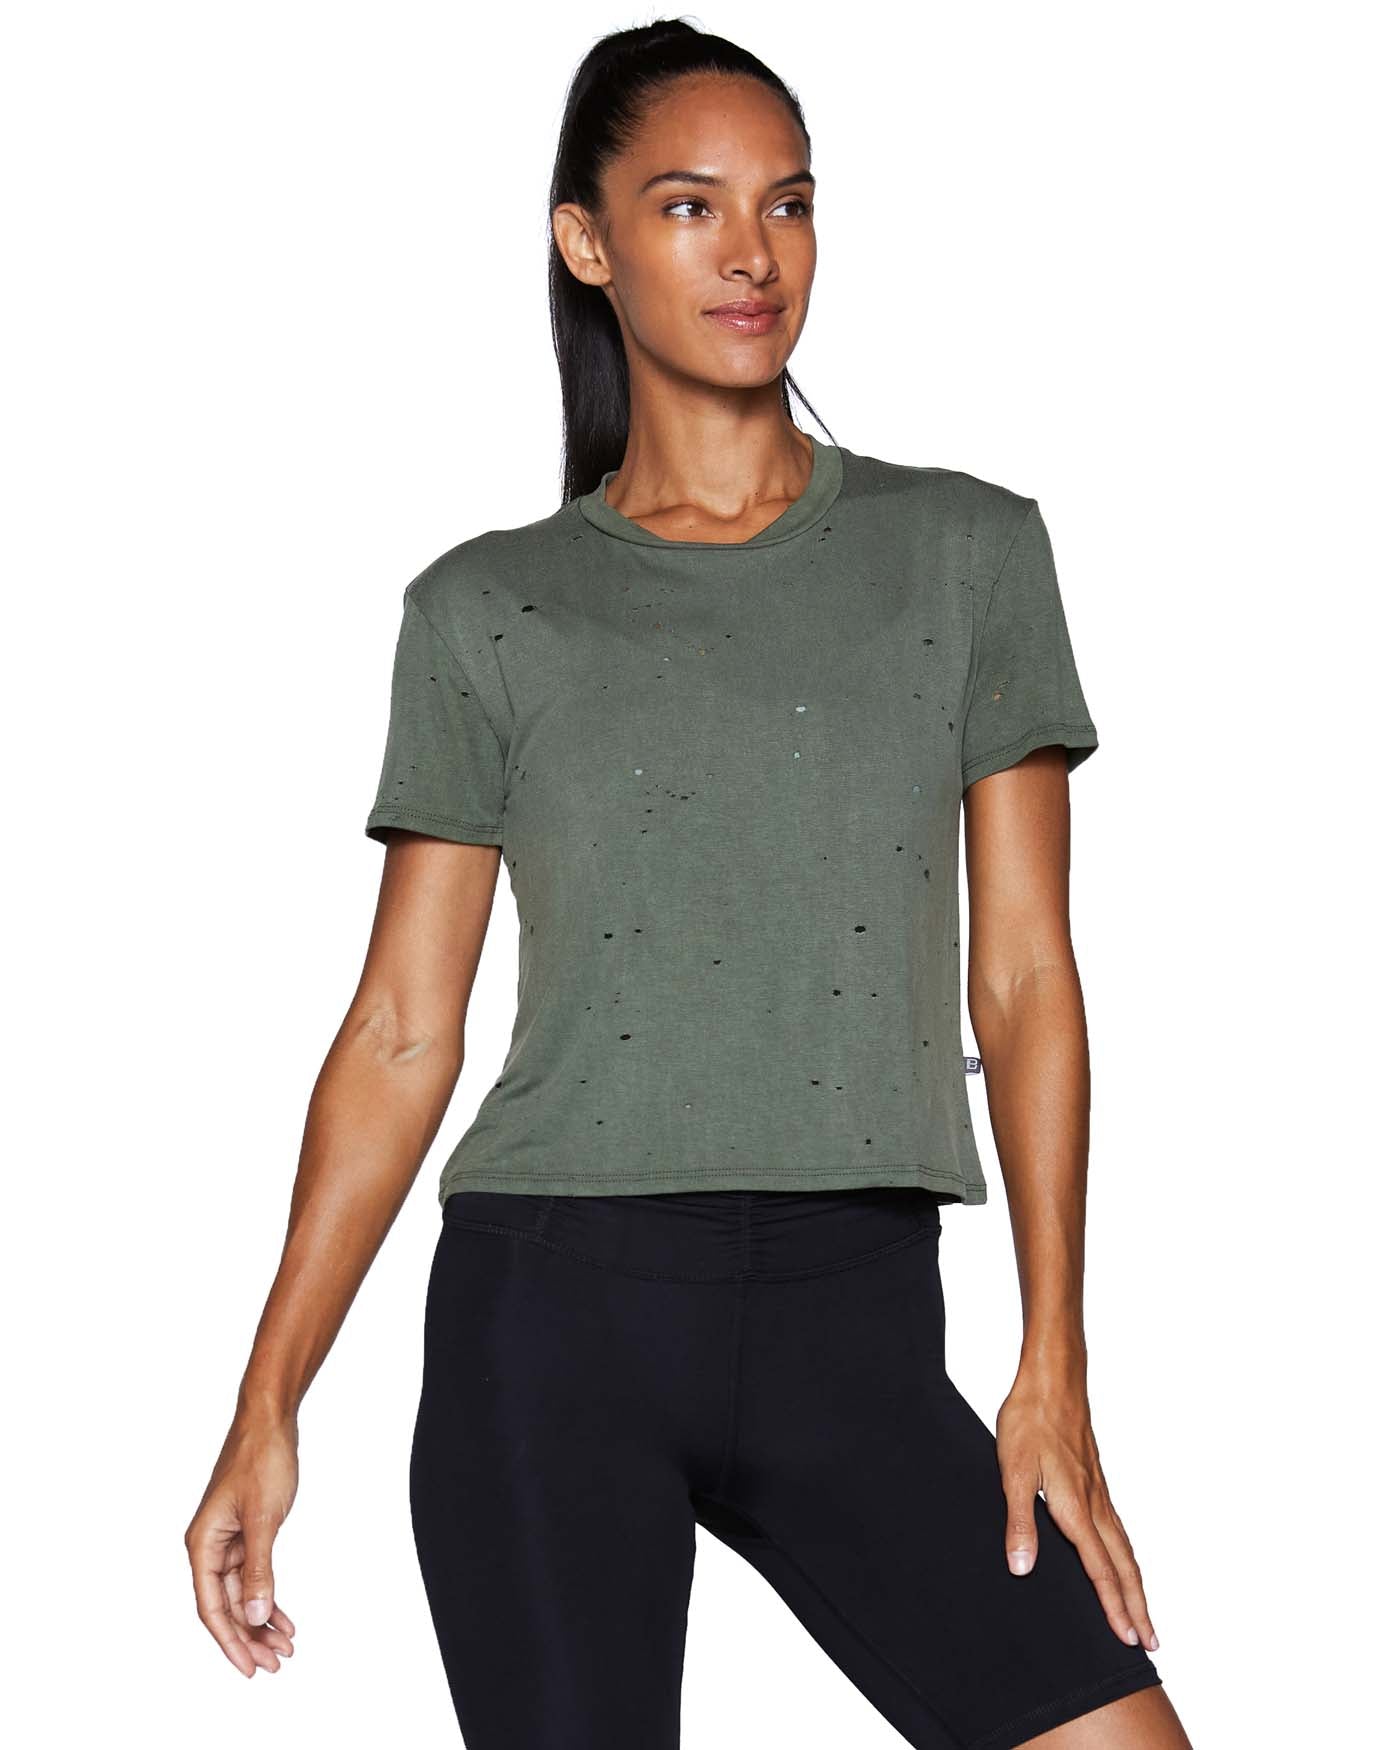 Xen Tee Olive | BodyLanguageSportswear | VINTAGE OLIVE | product | The Xen Tee is a distressed crew tee made from Our Luxury Modal Material. This tee may look tough bu